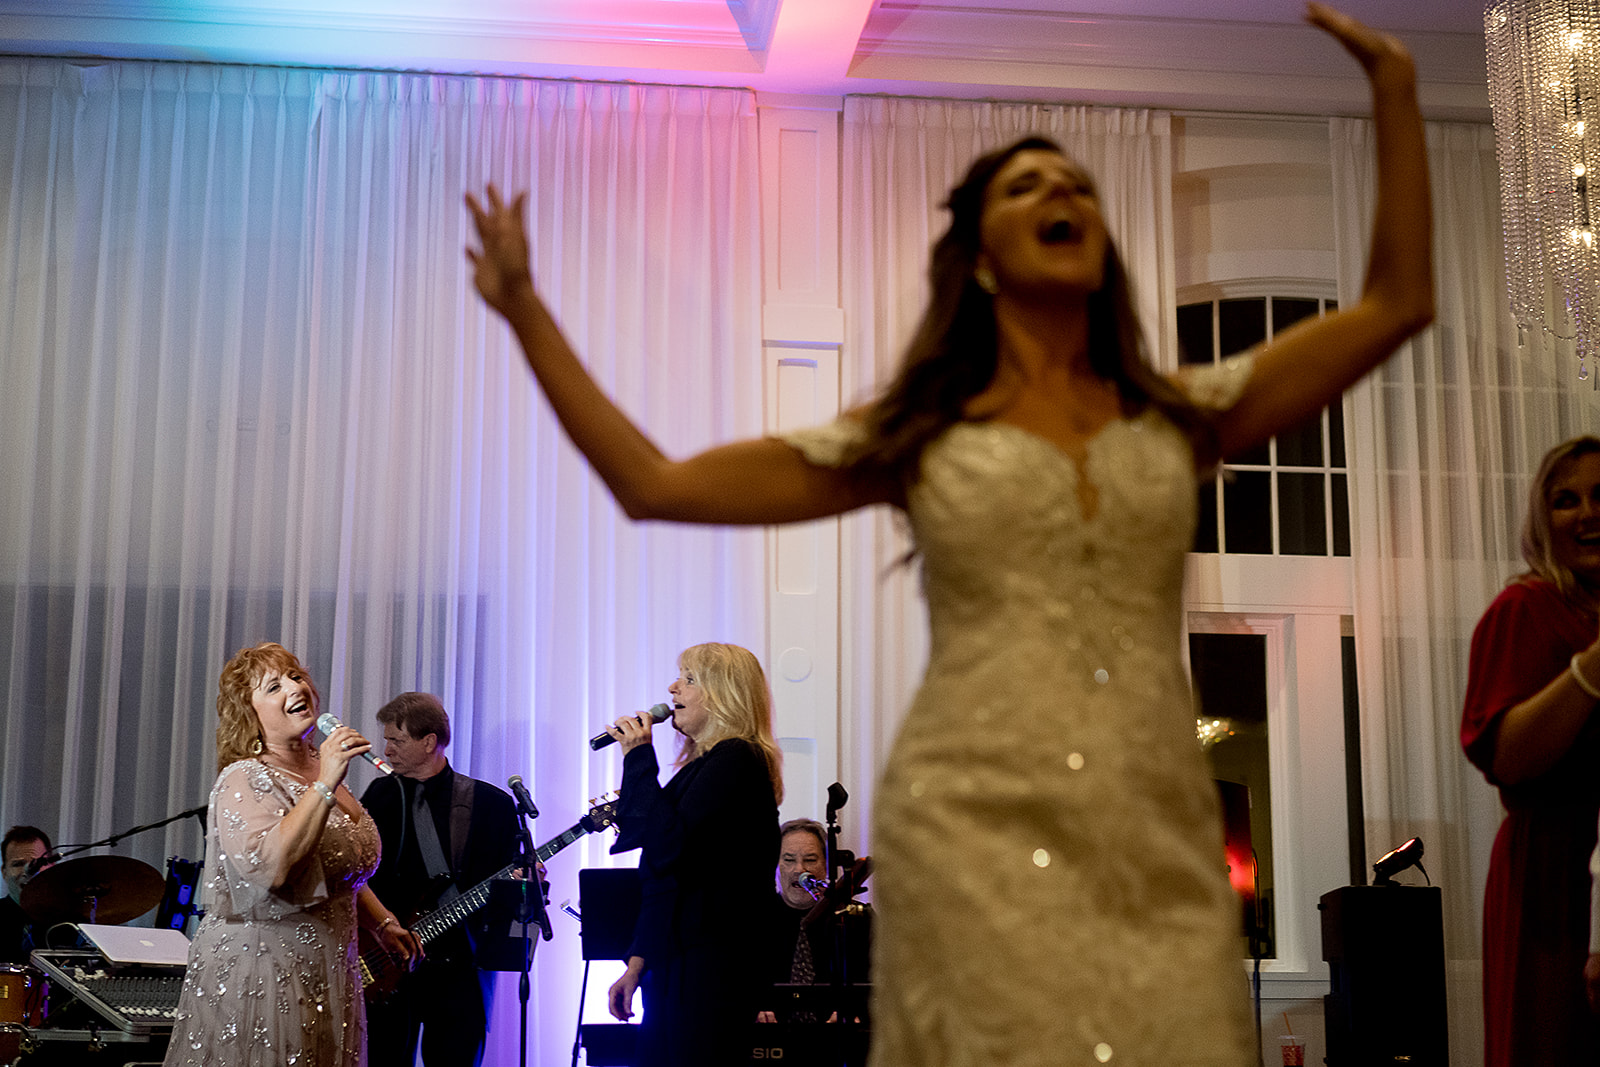 brides mother sings with the live band while bride dances at belle mer wedding reception 